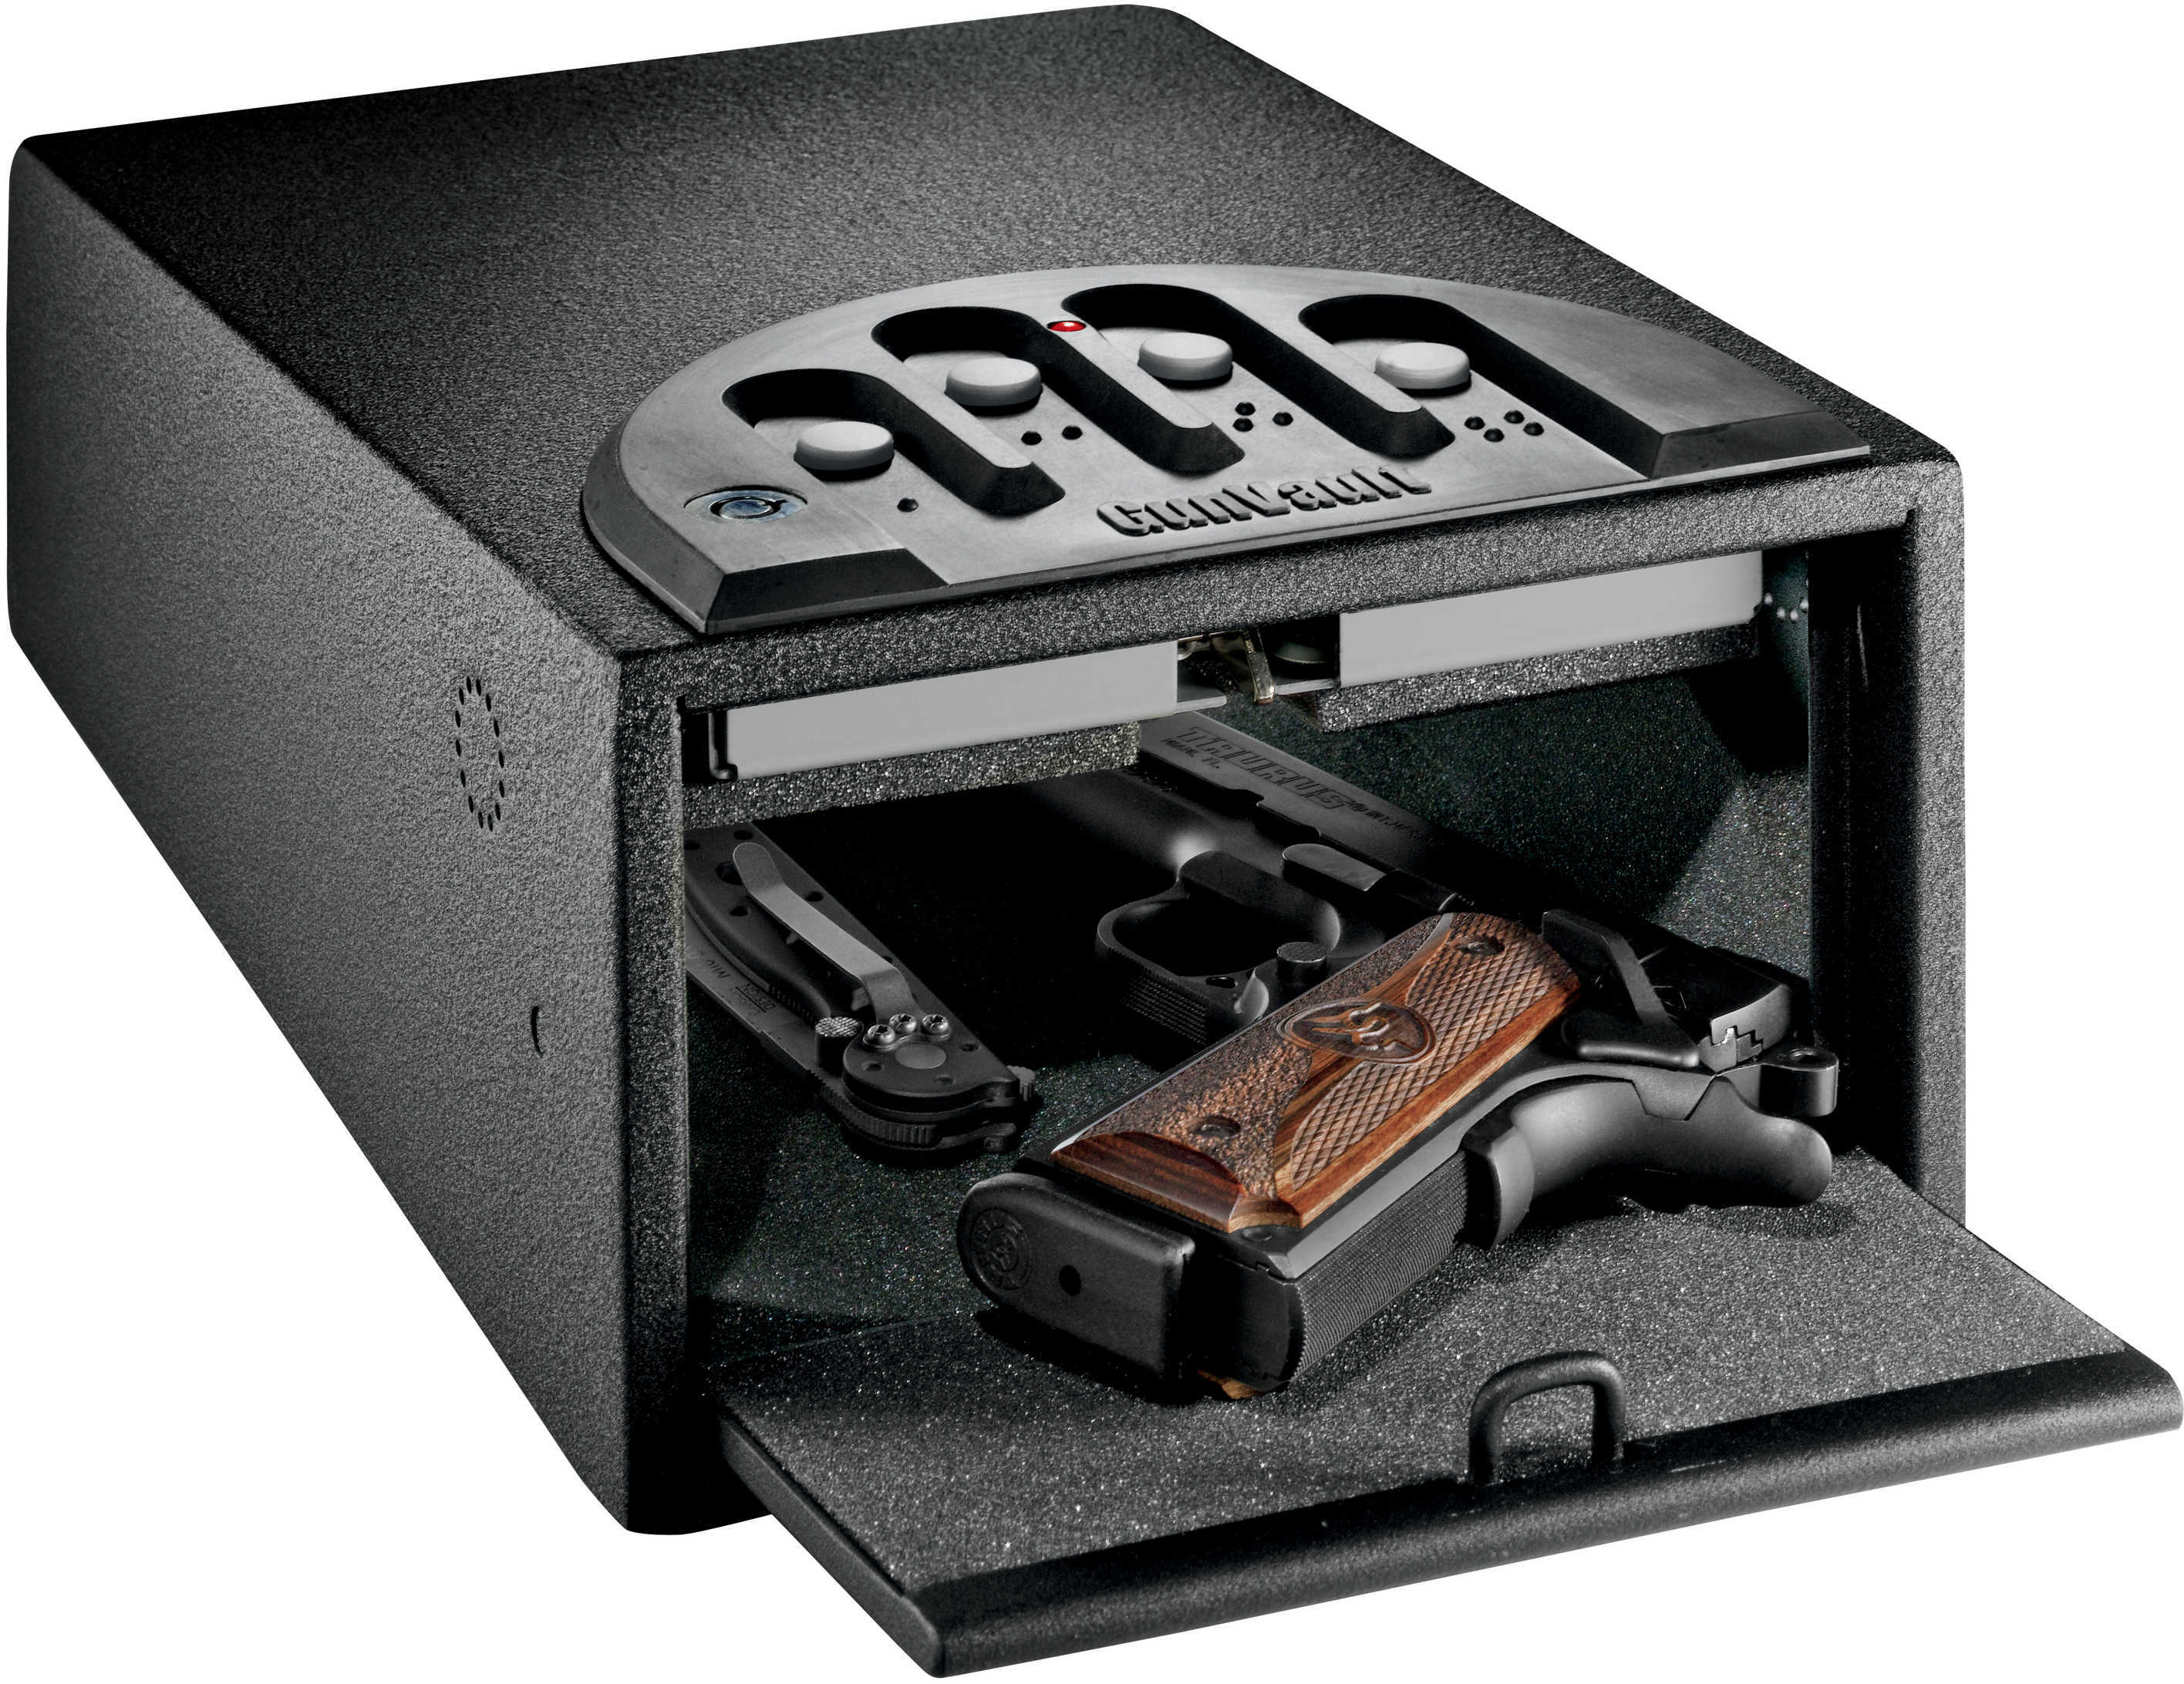 GunVault GV1000 Mini 16-Gauge Steel With Soft Foam Inside - Precise Fittings Are virtually Impossible To Pry Open - Tam